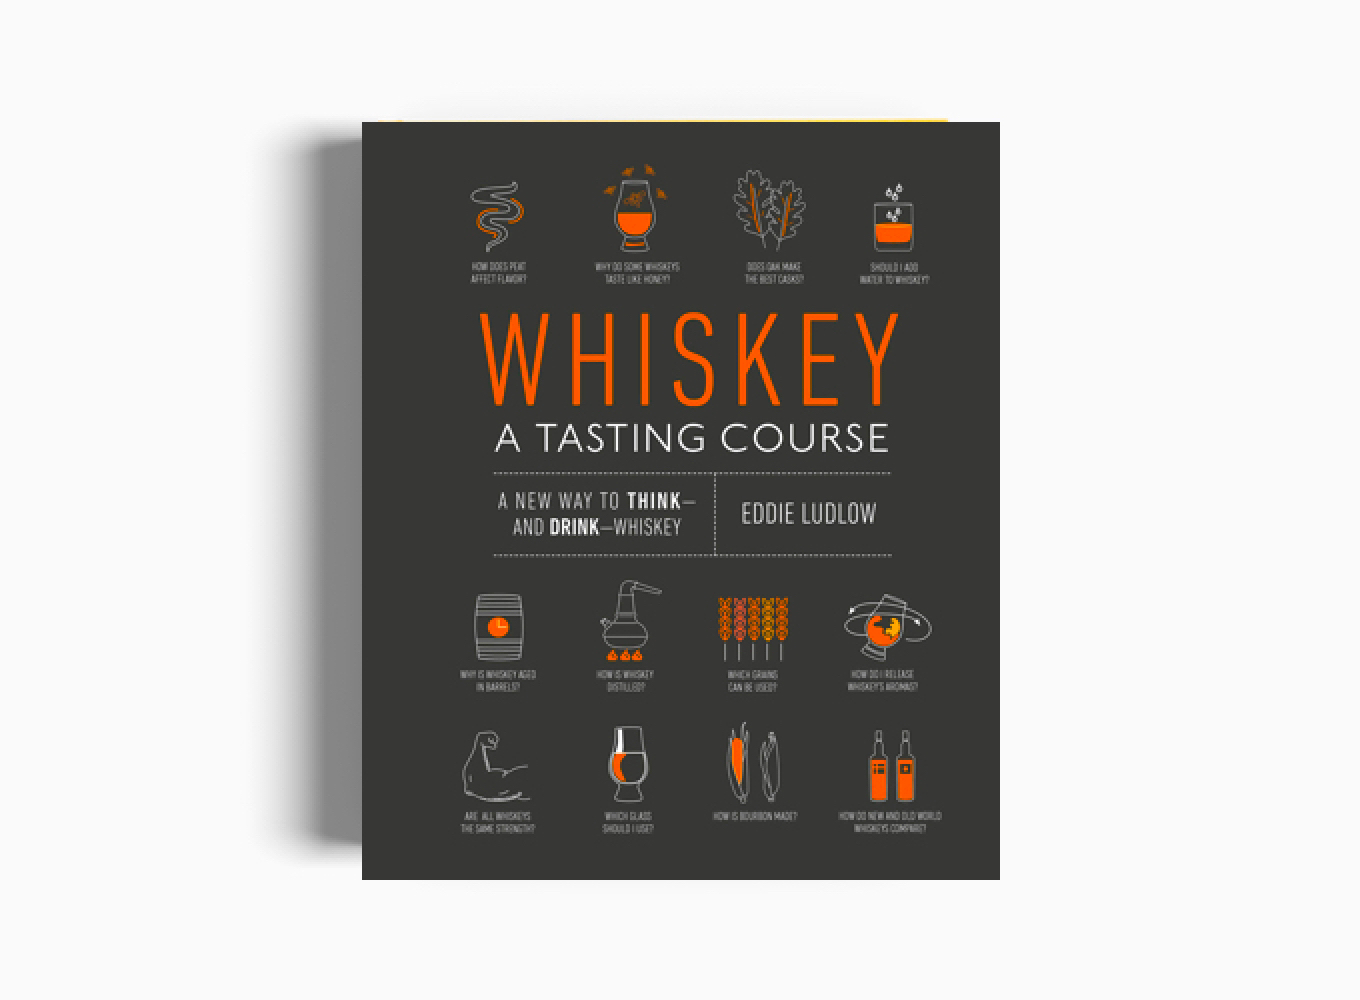 WHISKEY: A TASTING COURSE